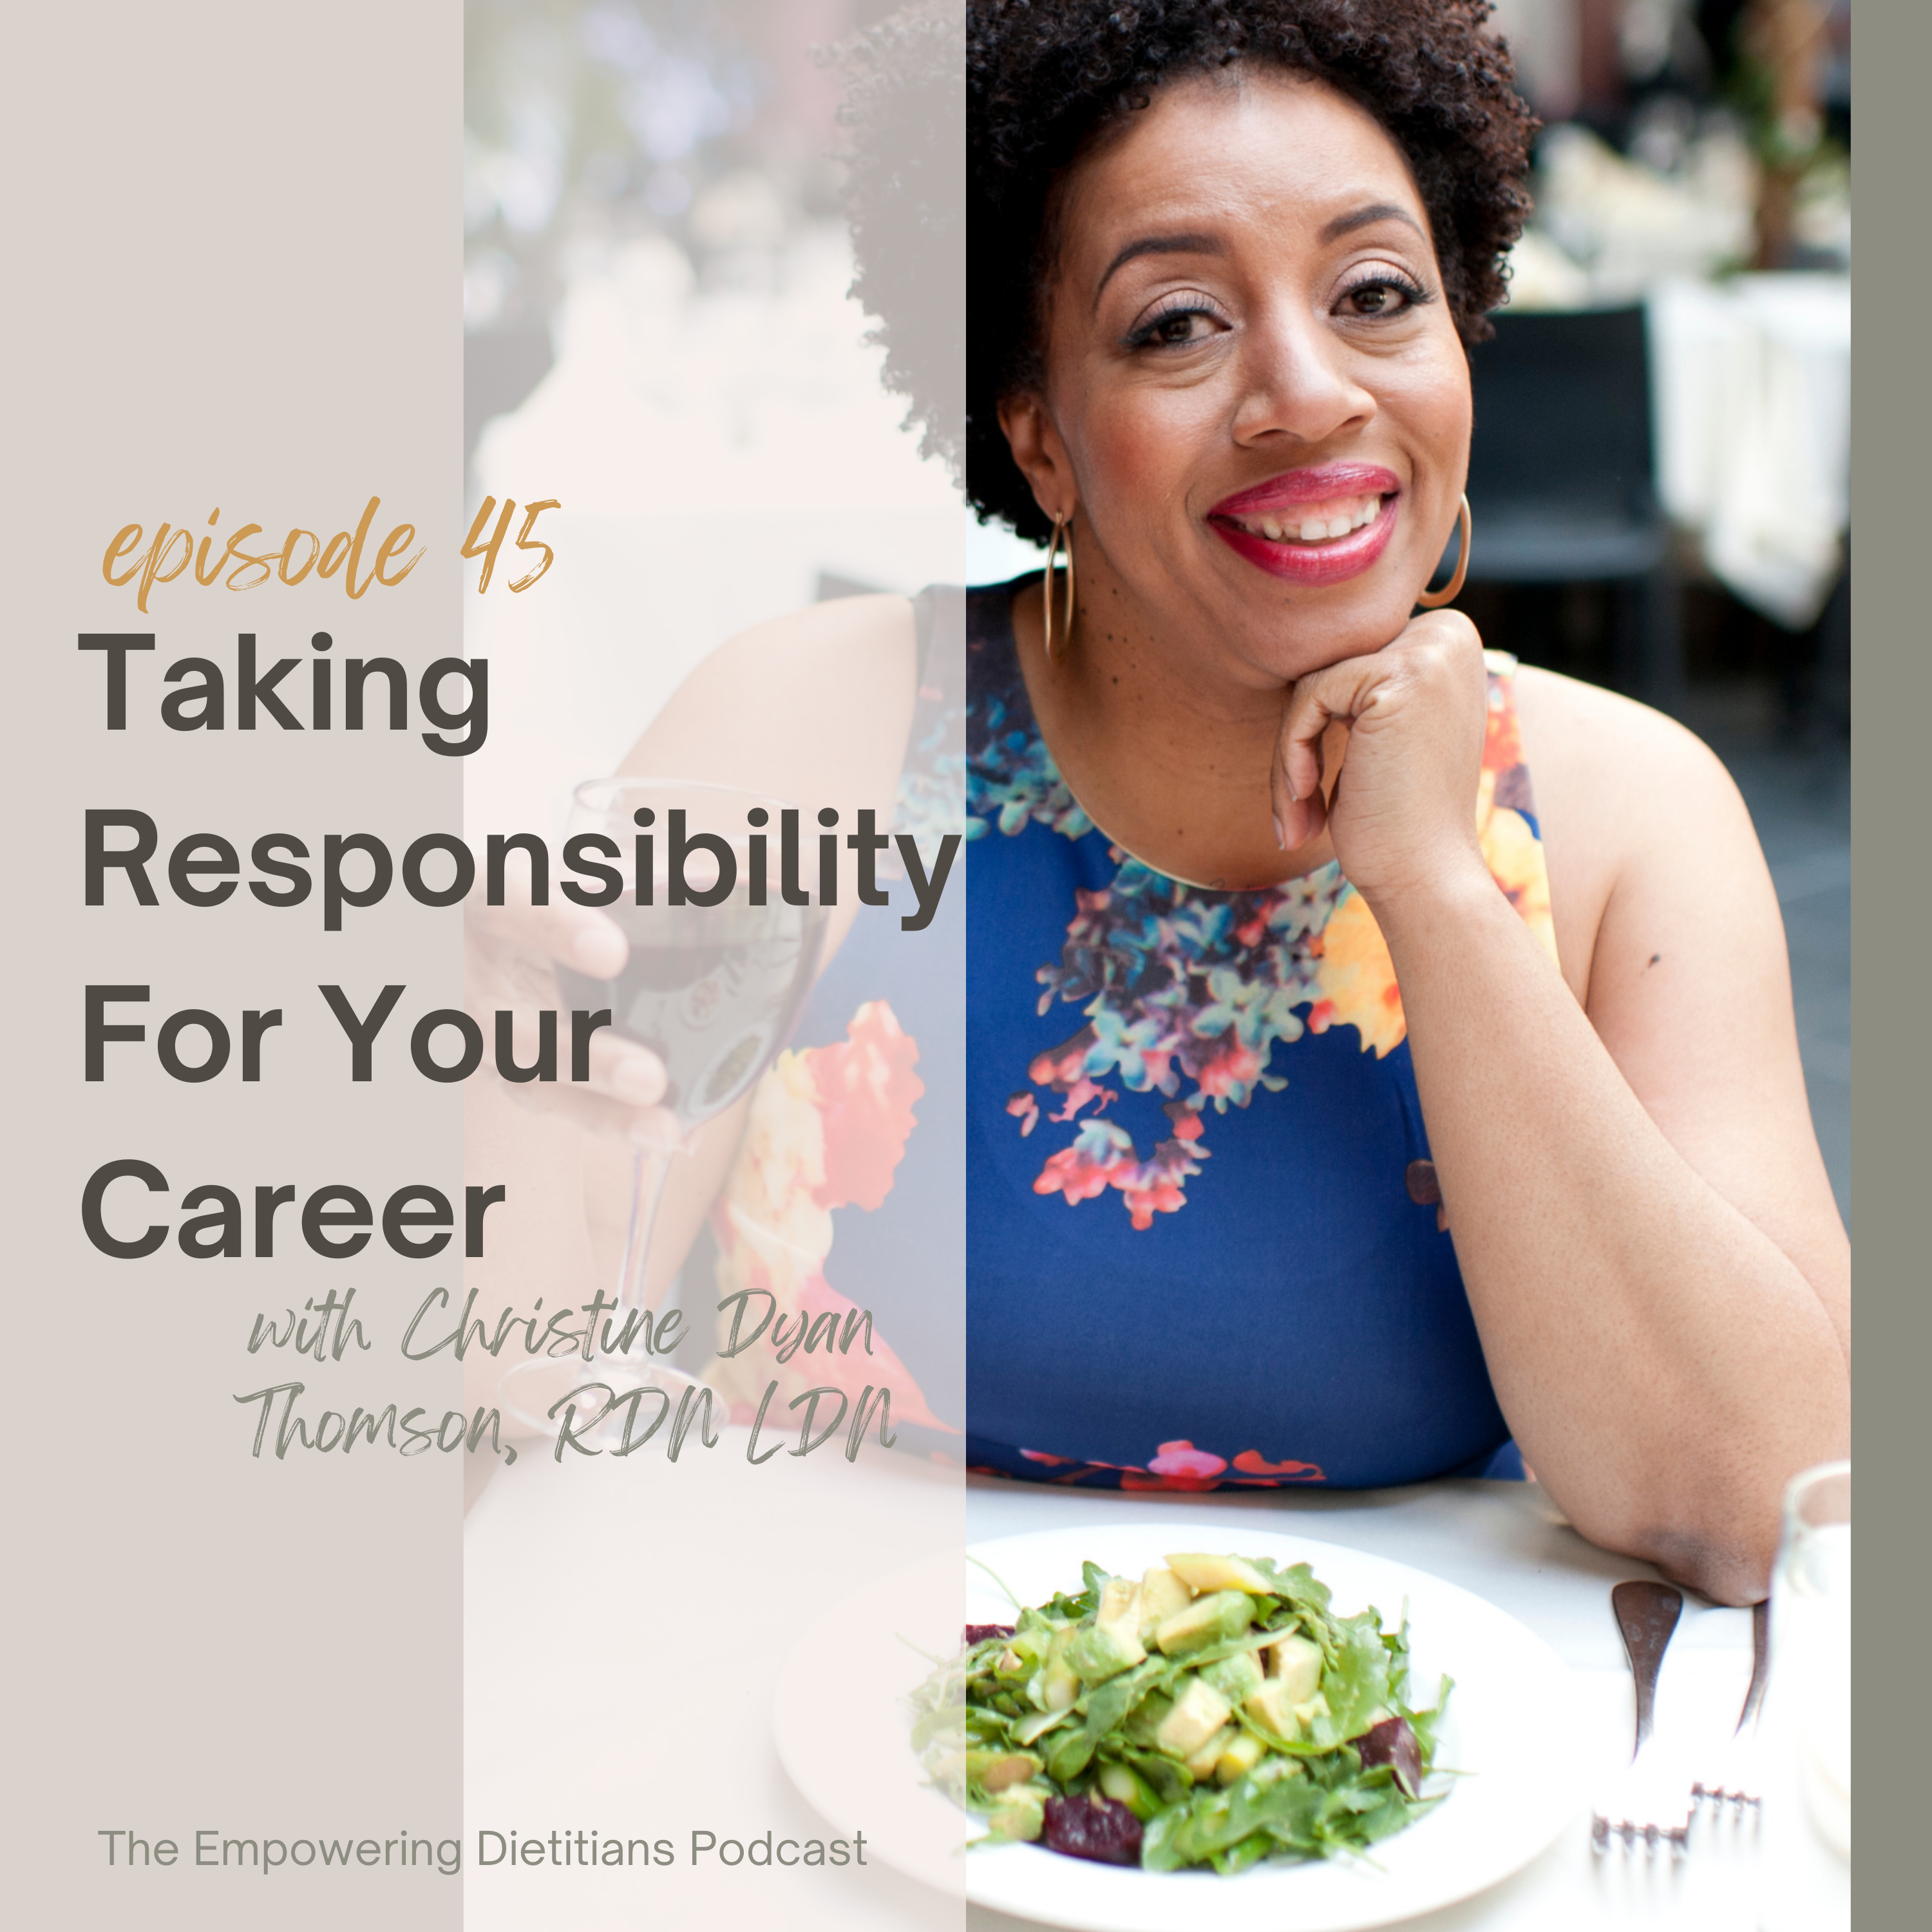 taking responsibility for your career with christine dyan thomson